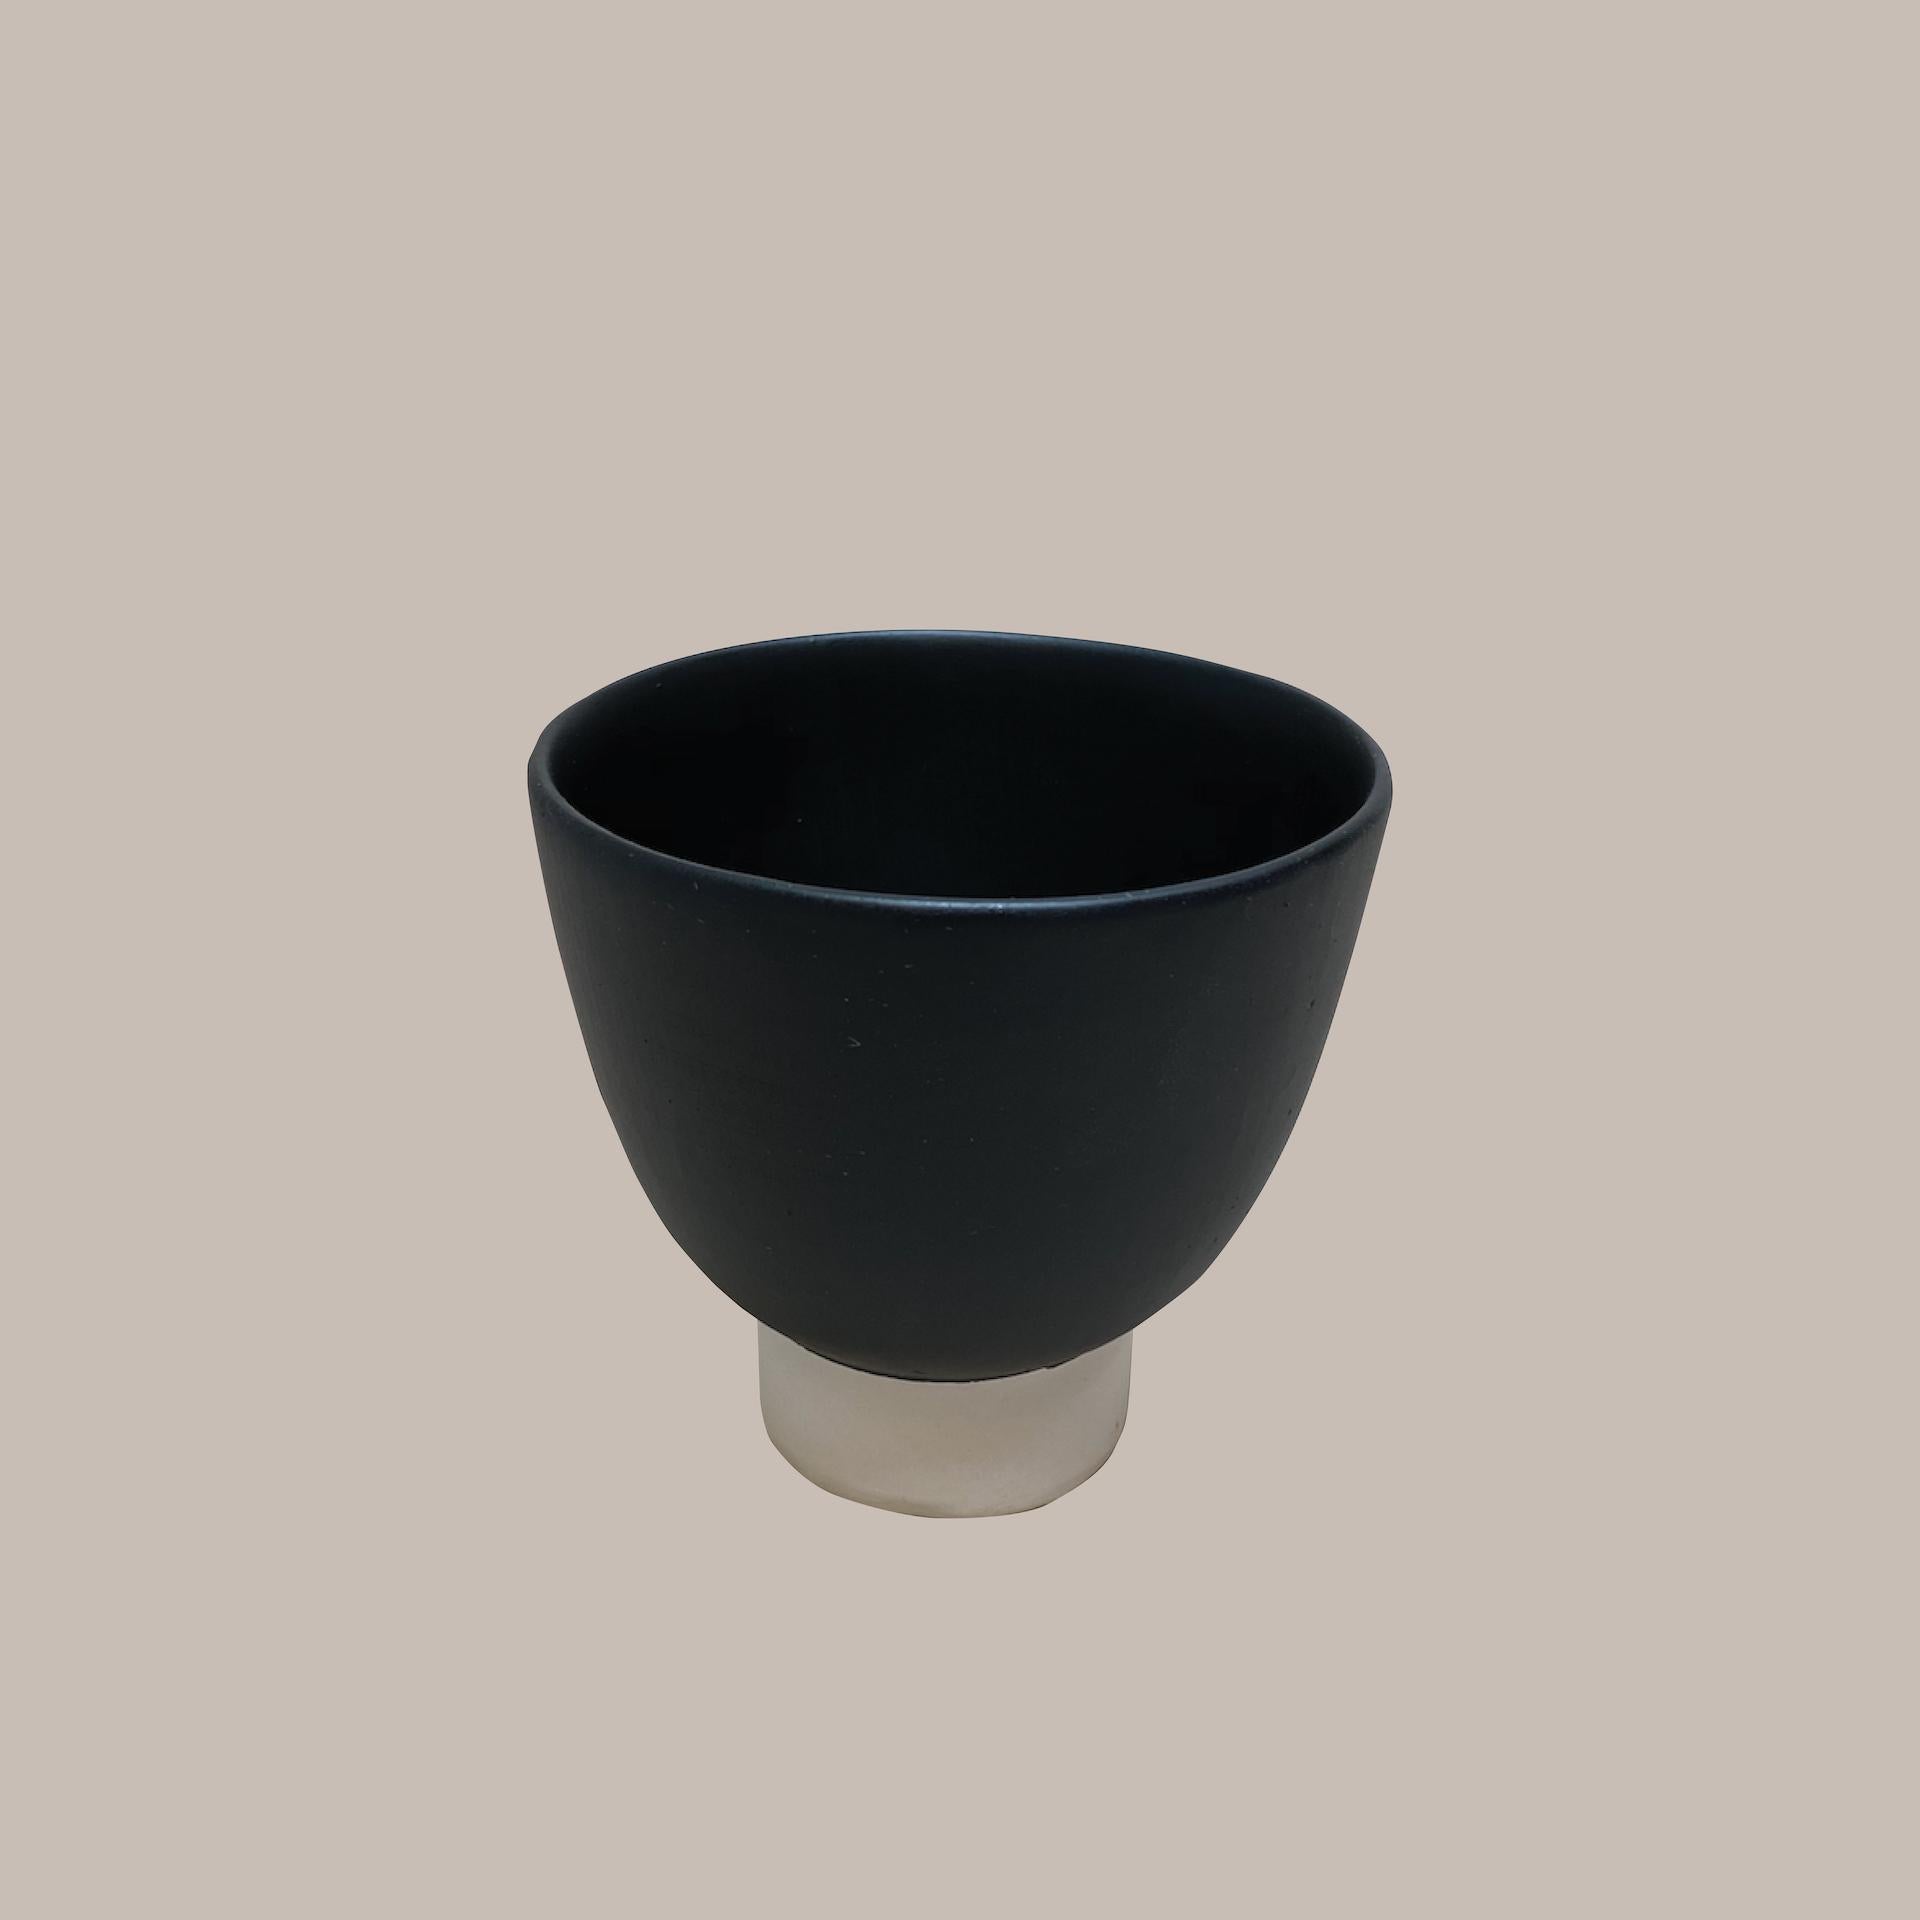 Ott another paradigmatic handmade ceramic cup by Studio Yoon Seok-hyeon
Dimensions: W 10 x H 9 cm
Materials: Ott(Natural resin from Ott tree), porcelain
250g

It is available to customize various colors in Ott's natural color range(Brownish,